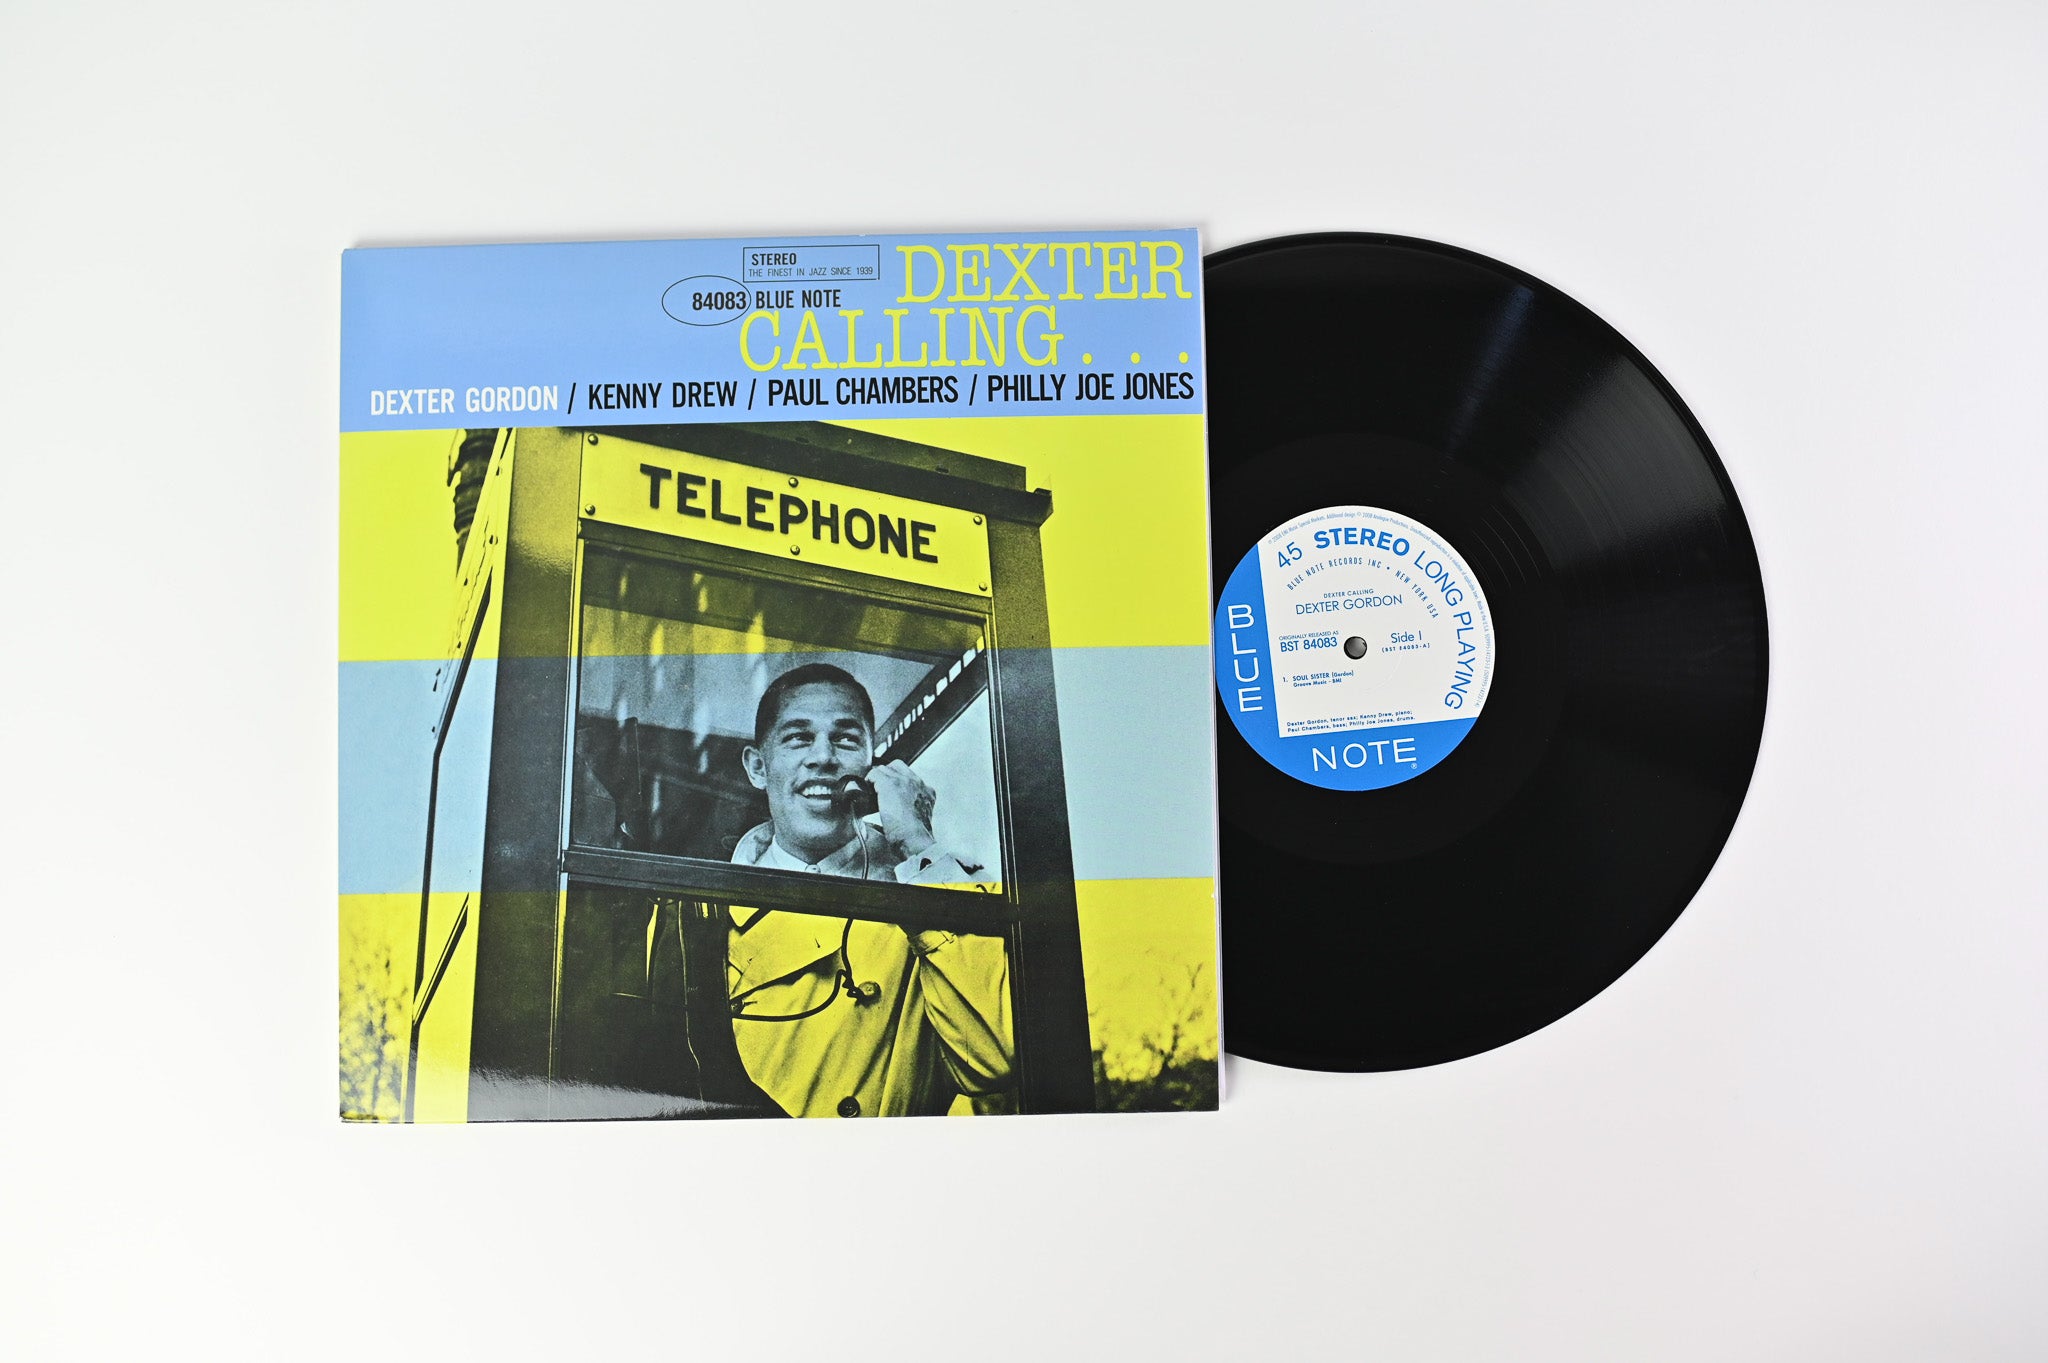 Dexter Gordon - Dexter Calling on Blue Note Analogue Productions Ltd 45 RPM Numbered Reissue